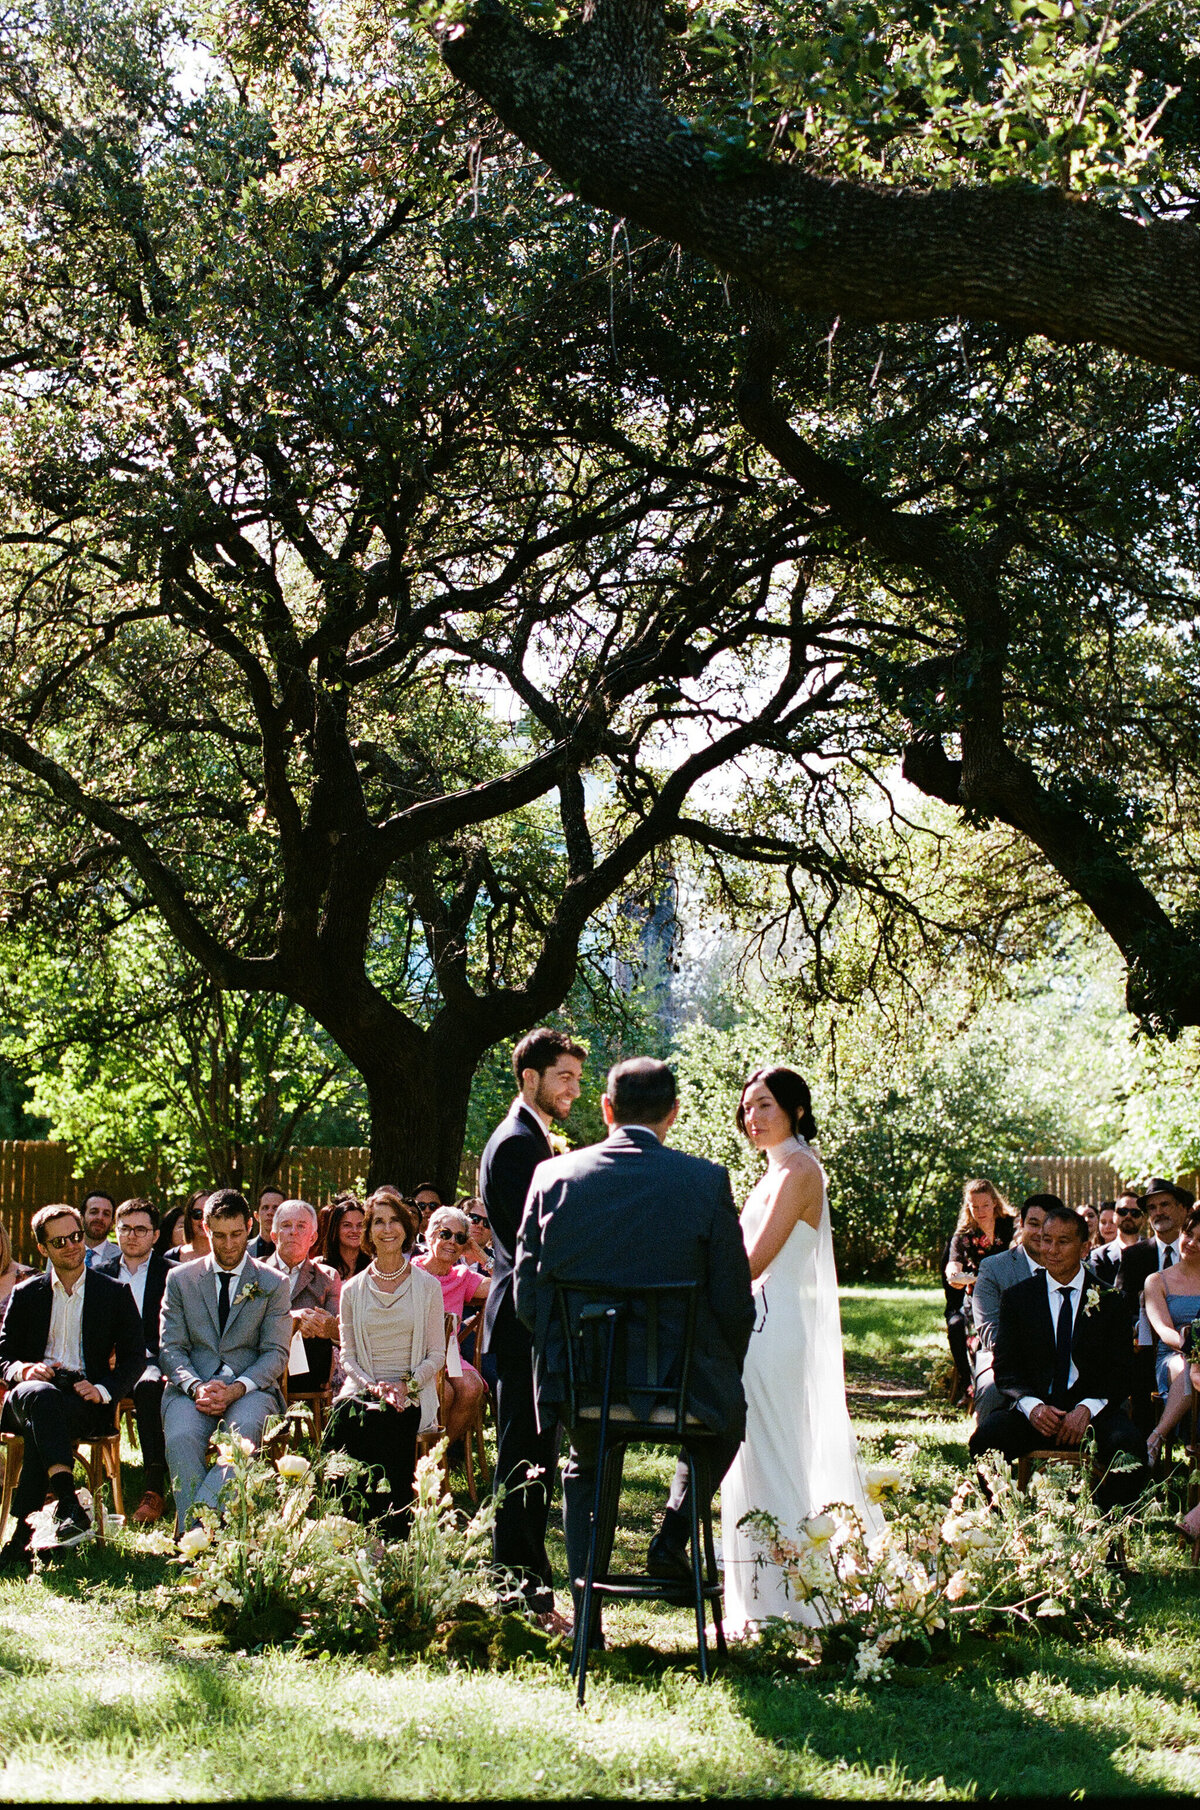 Bride and groom exchanging vows at outdoor wedding ceremony at Mattie's Austin